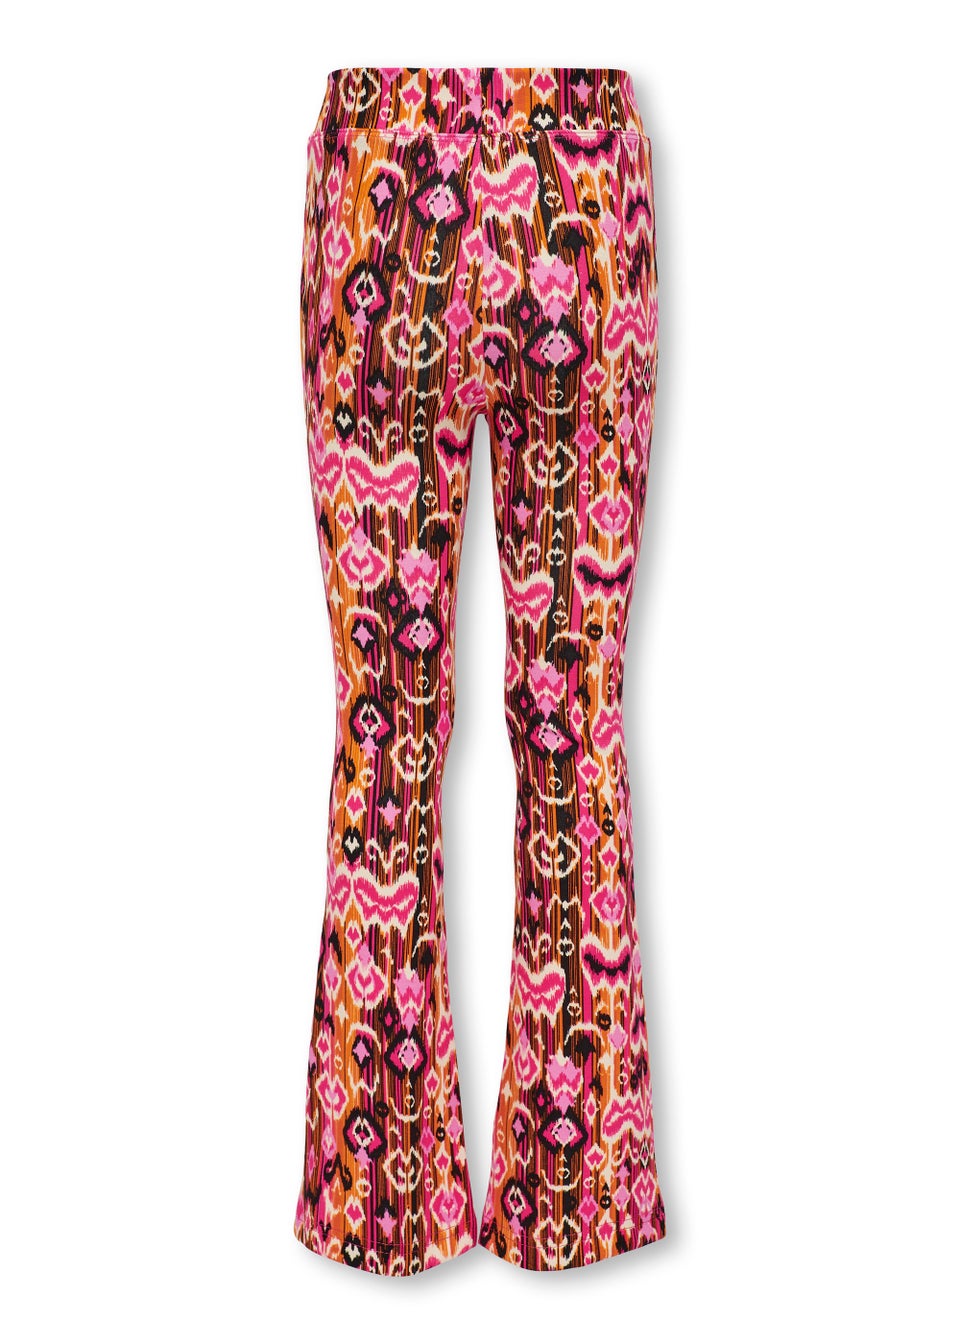 ONLY Girls Orange Print Flared Trousers (6-14yrs)